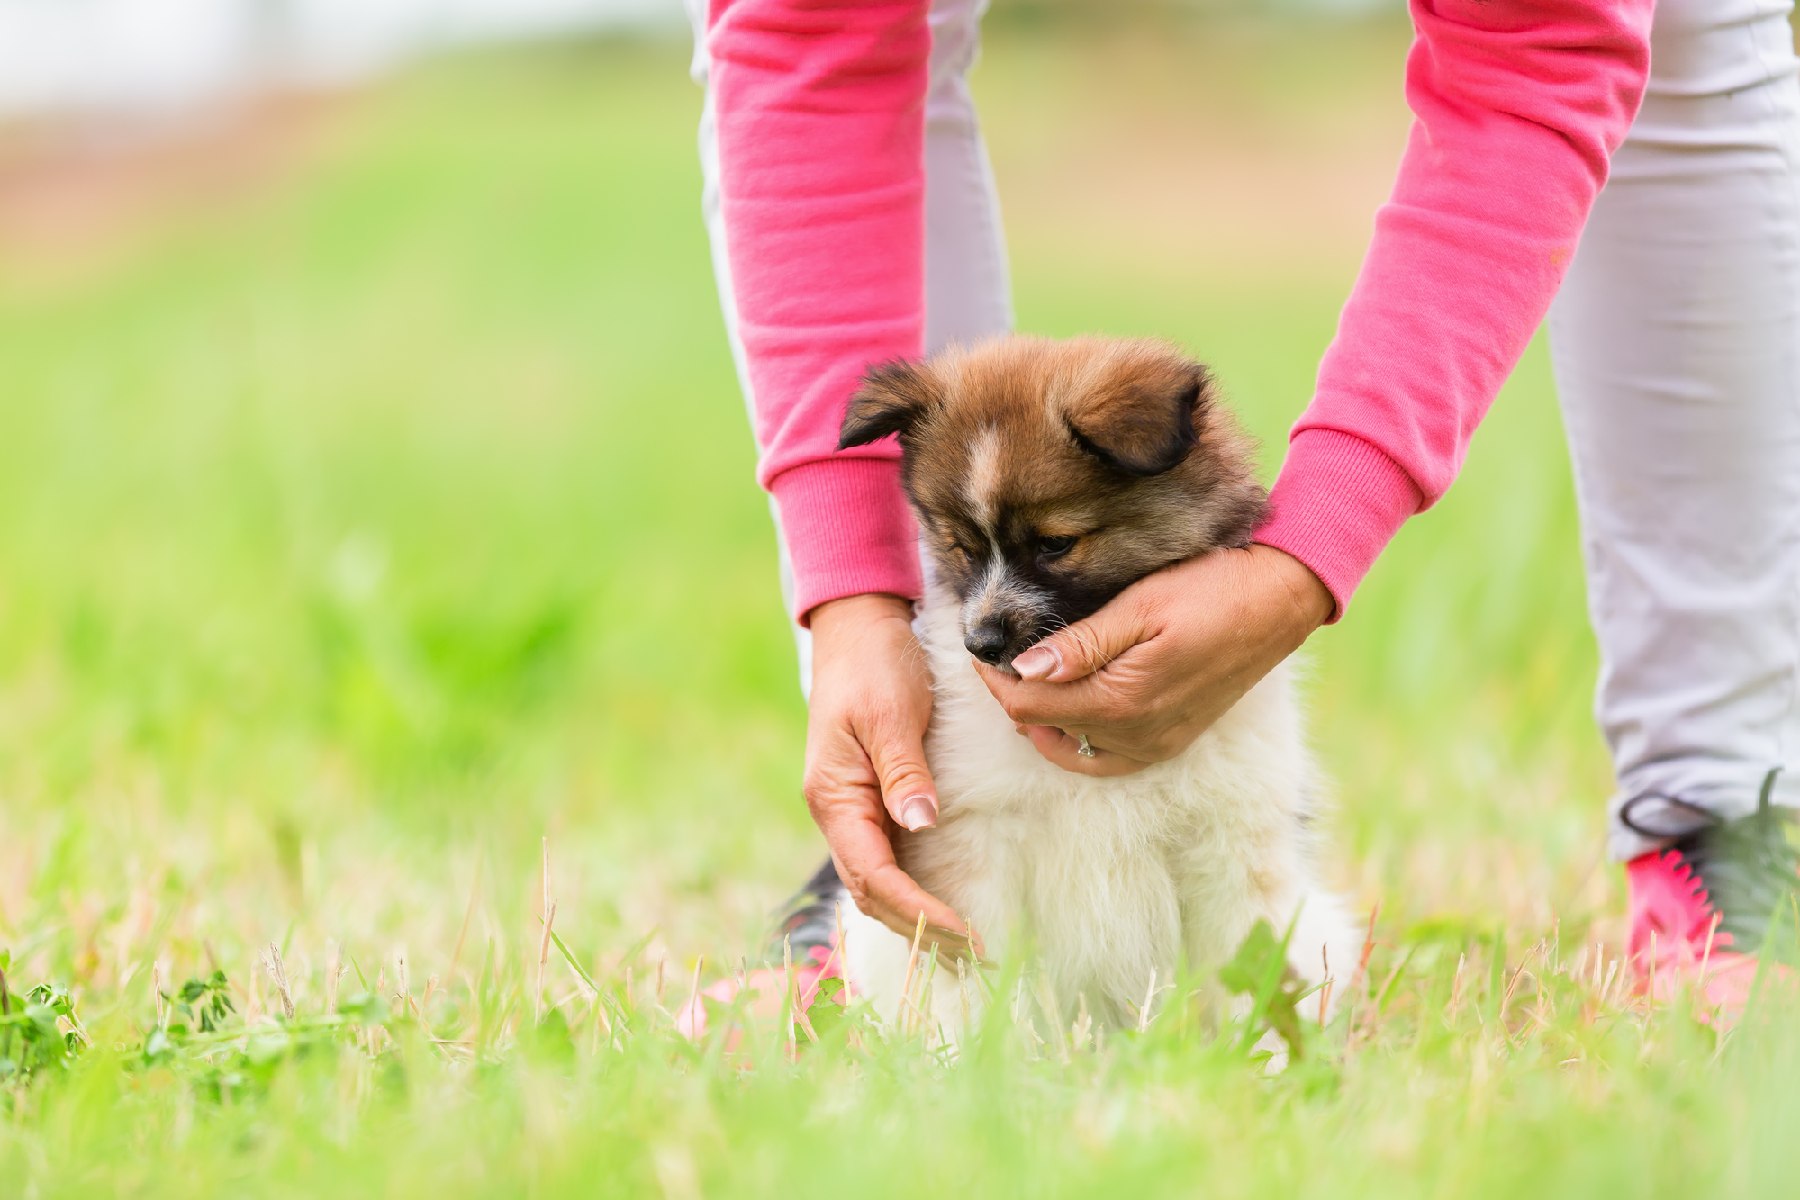 Puppy Training in High Positive Puppy Training